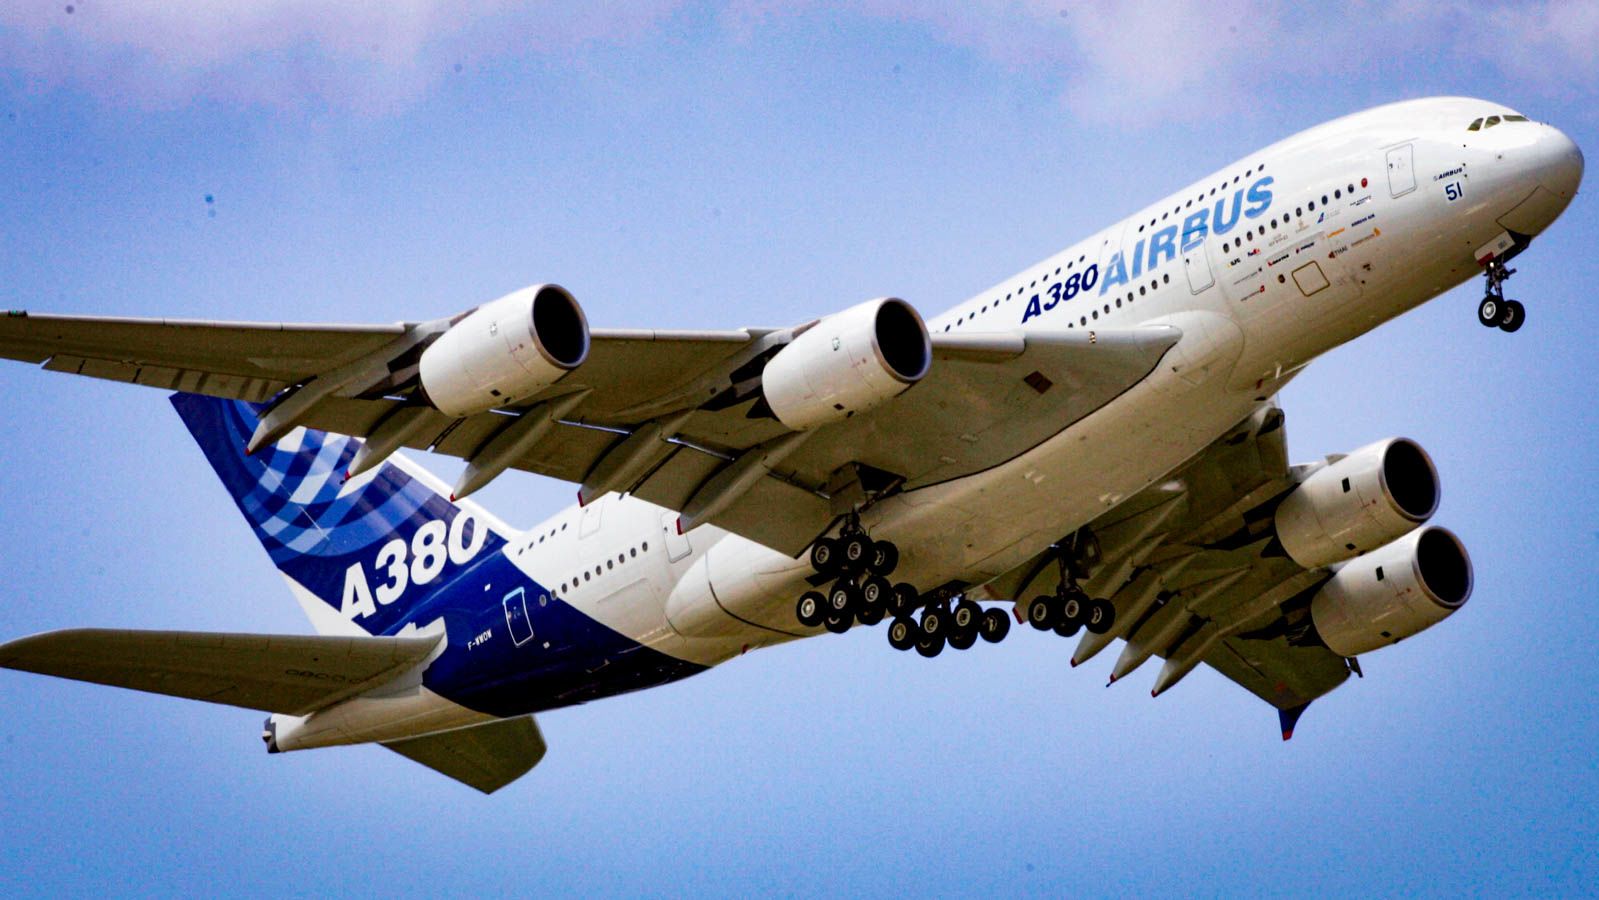 Why is A380 so popular?